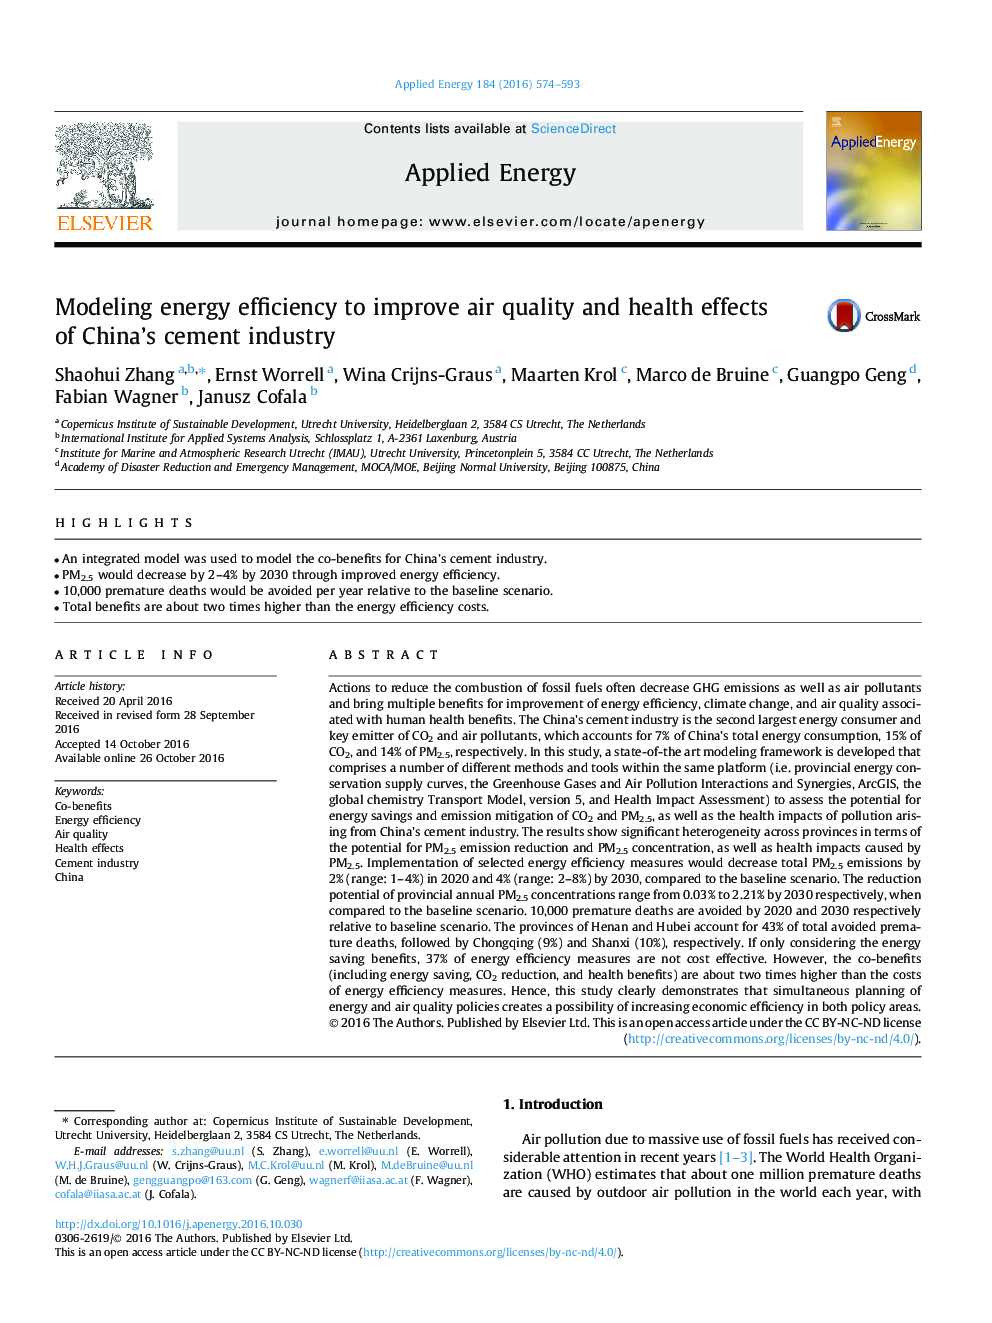 Modeling energy efficiency to improve air quality and health effects of China's cement industry